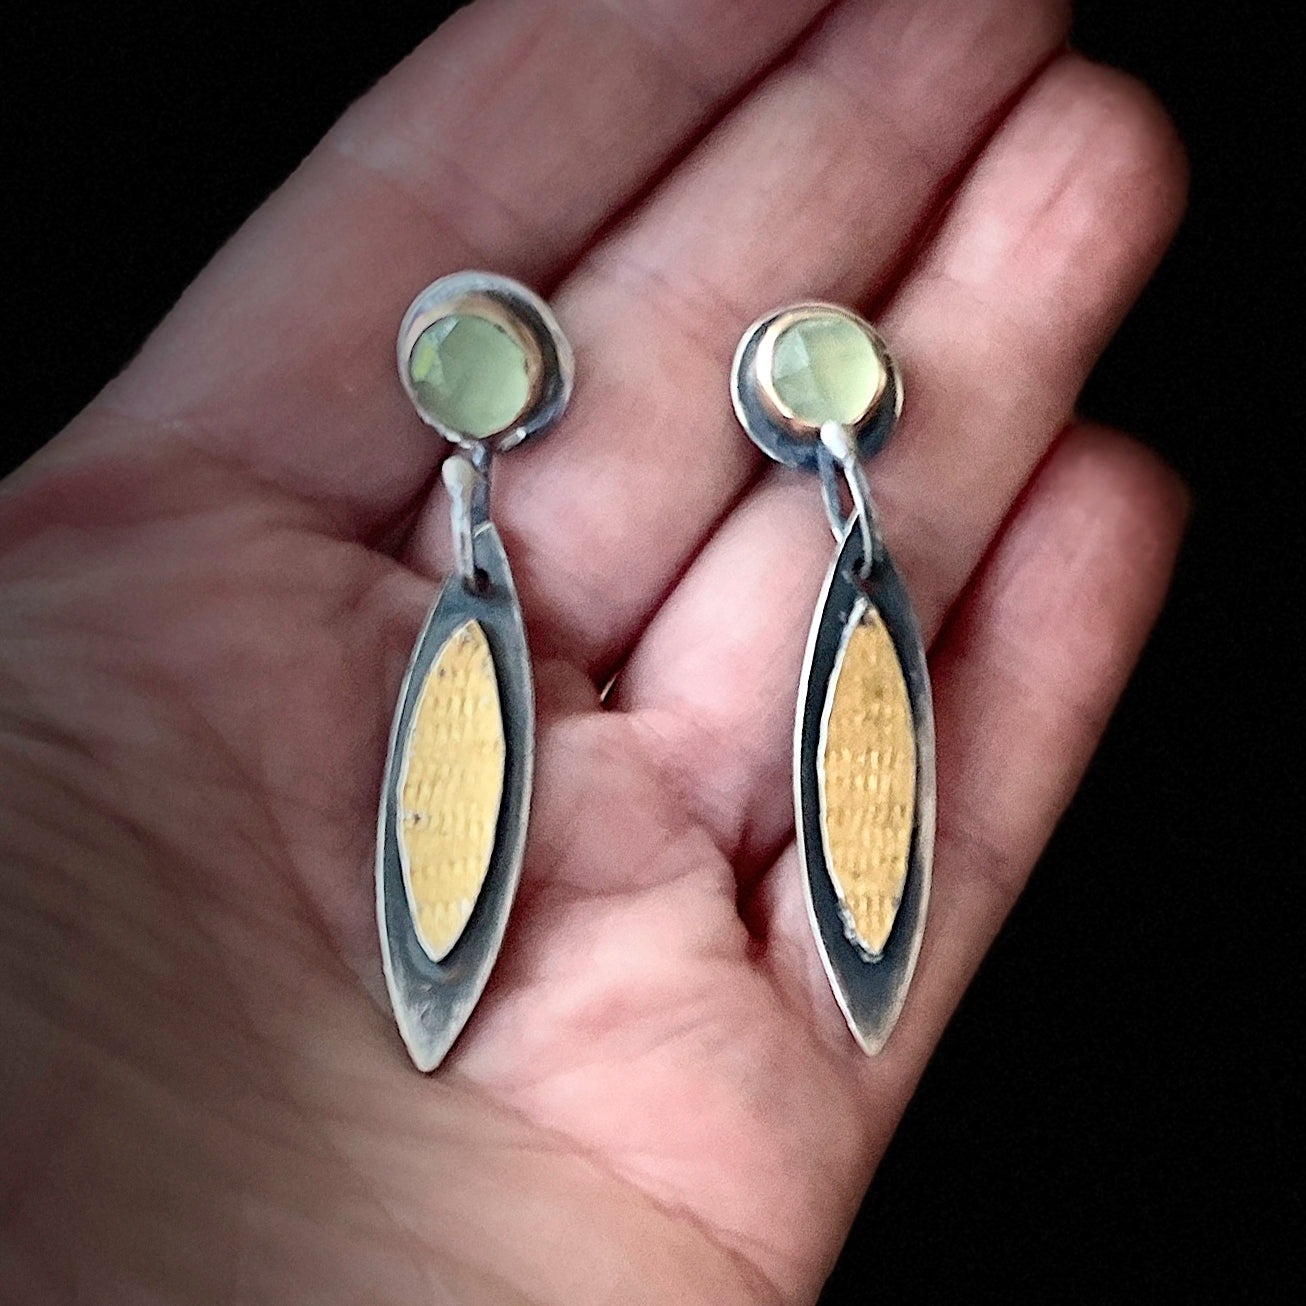 Faceted Green Chalcedony Earrings with Sterling Silver and Keum boo